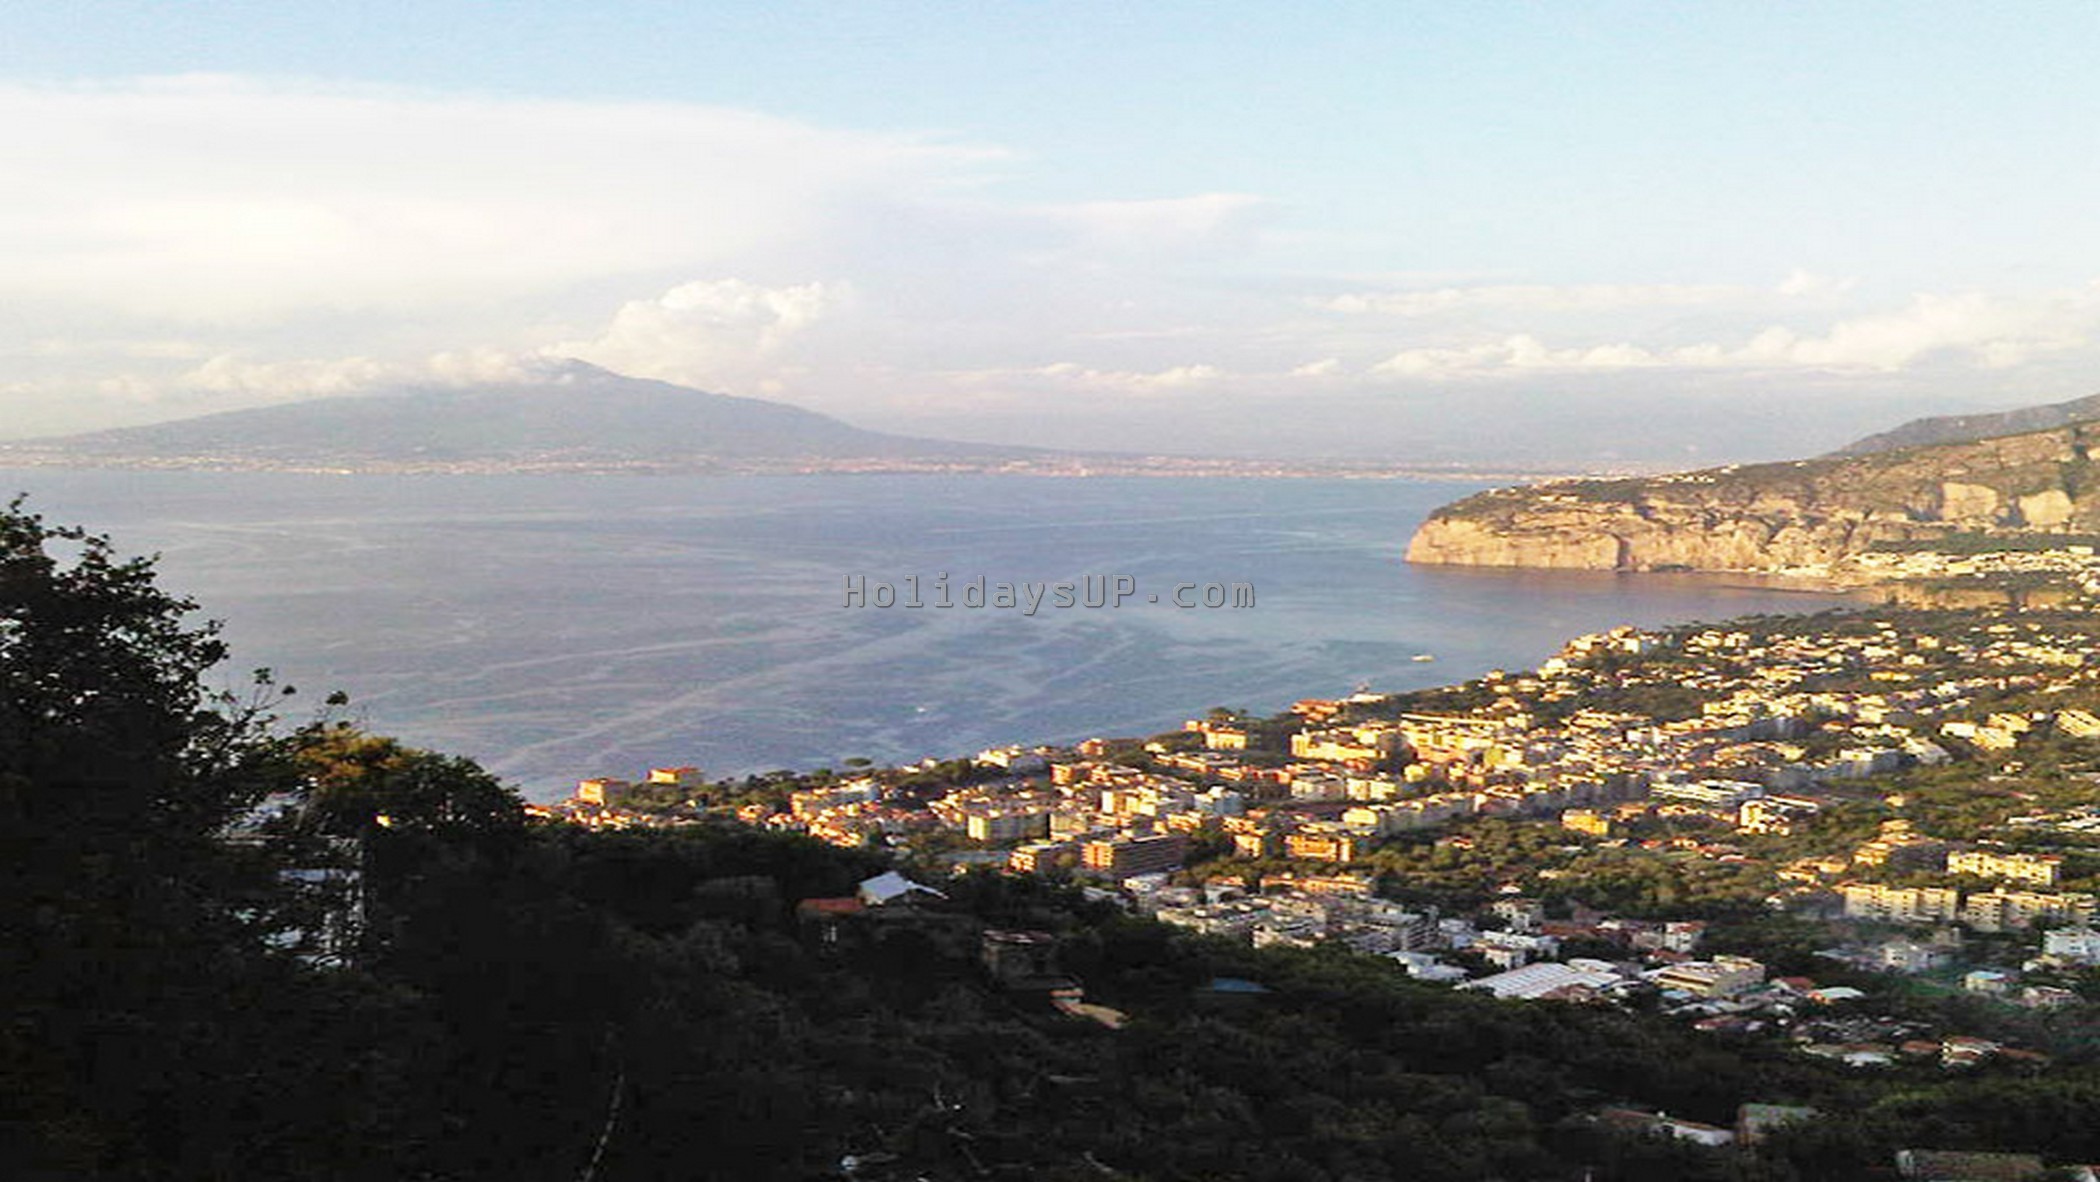 Sorrento coast view and Vesuvius mount view holiday booking rentals guesthouse